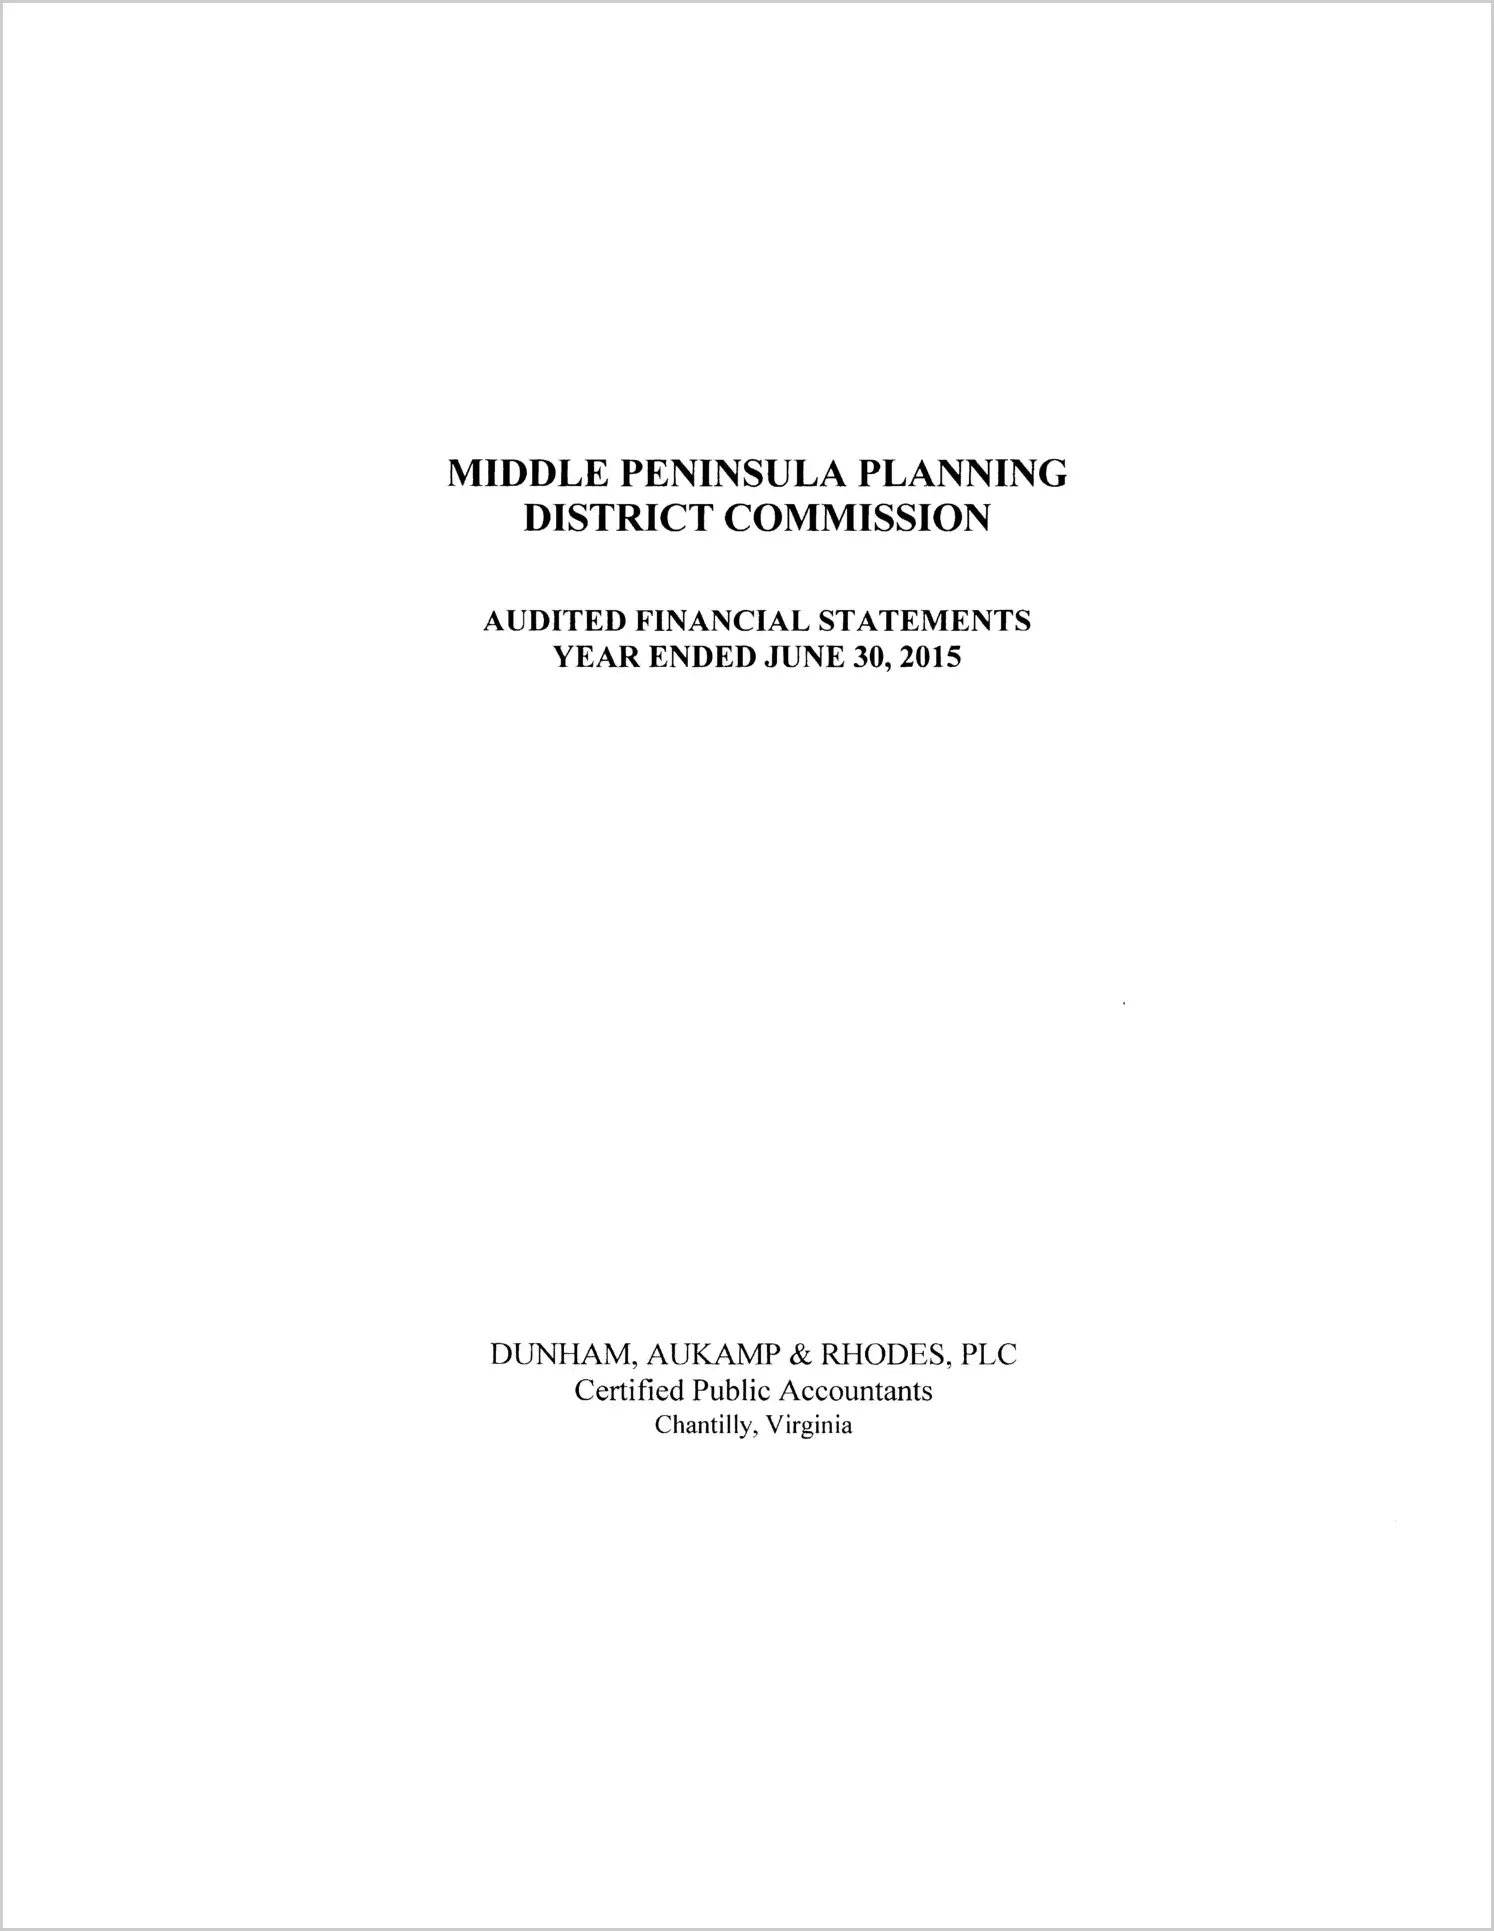 2015 ABC/Other Annual Financial Report  for Middle Peninsula Planning District Commission